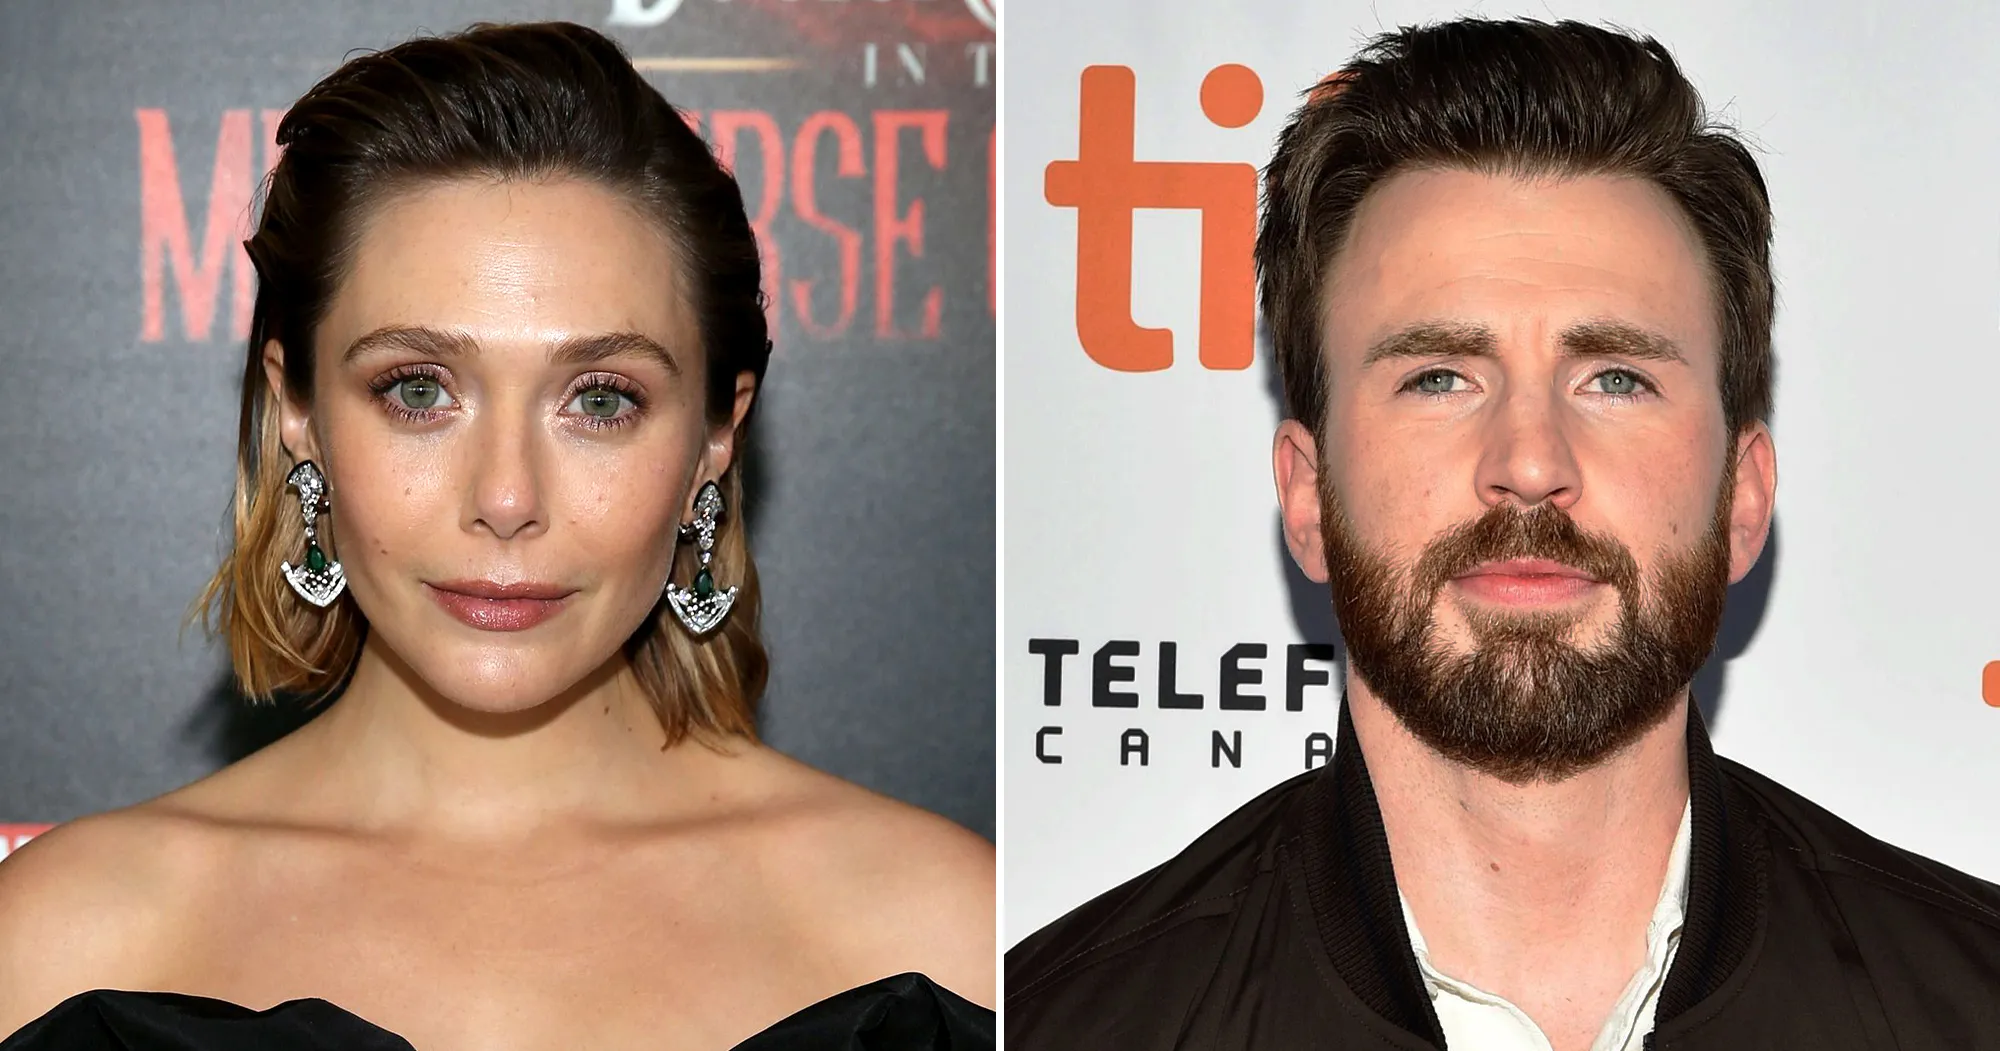 Elizabeth Olsen reveals why she doesn't hang out with Avengers costar Chris Evans anymore